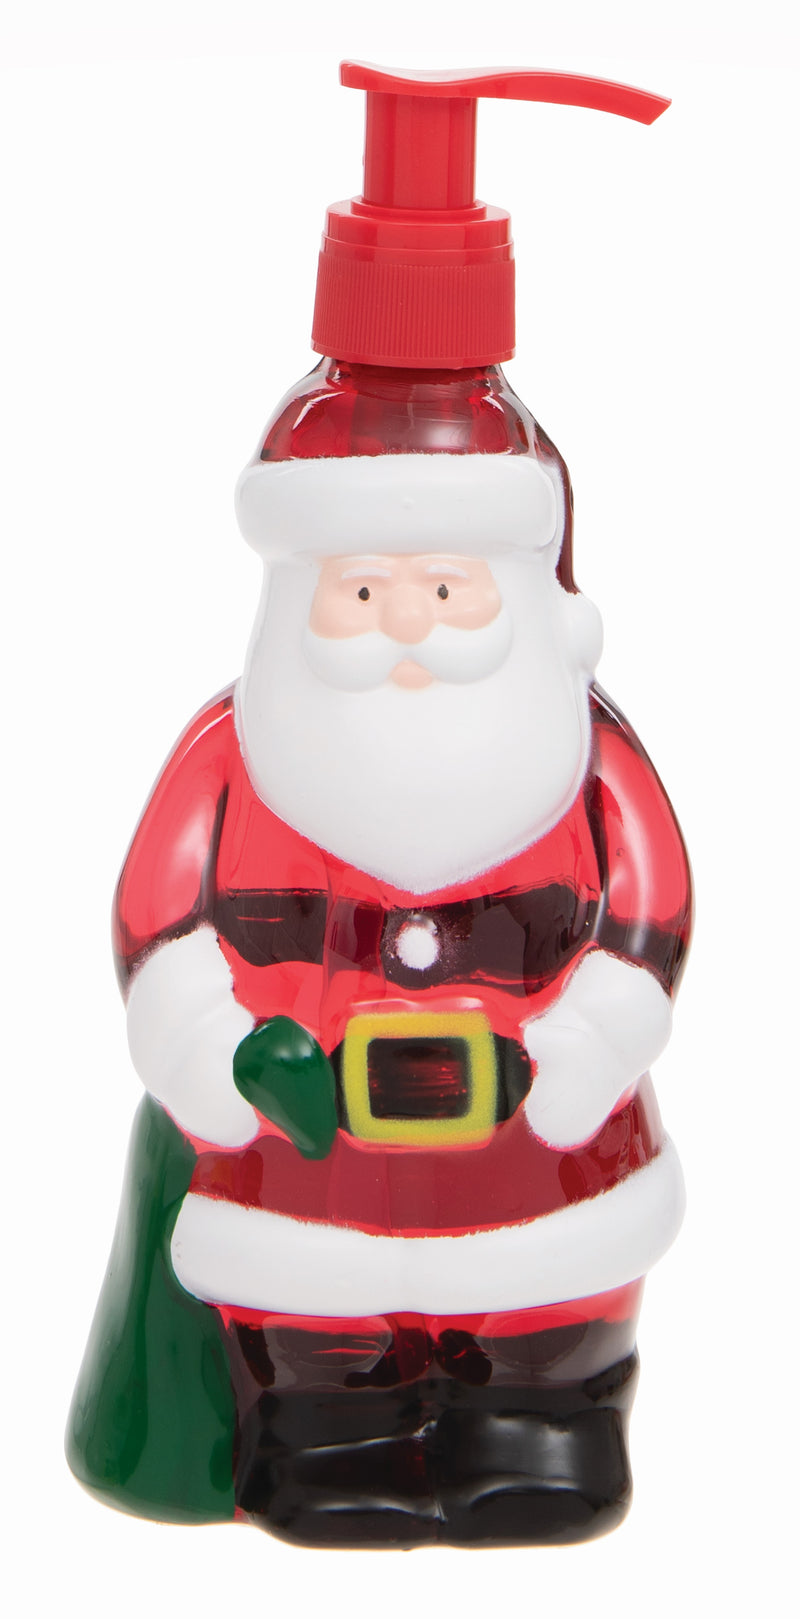 Novelty Standard Character Hand Washes - Santa by Badgequo 300 ml